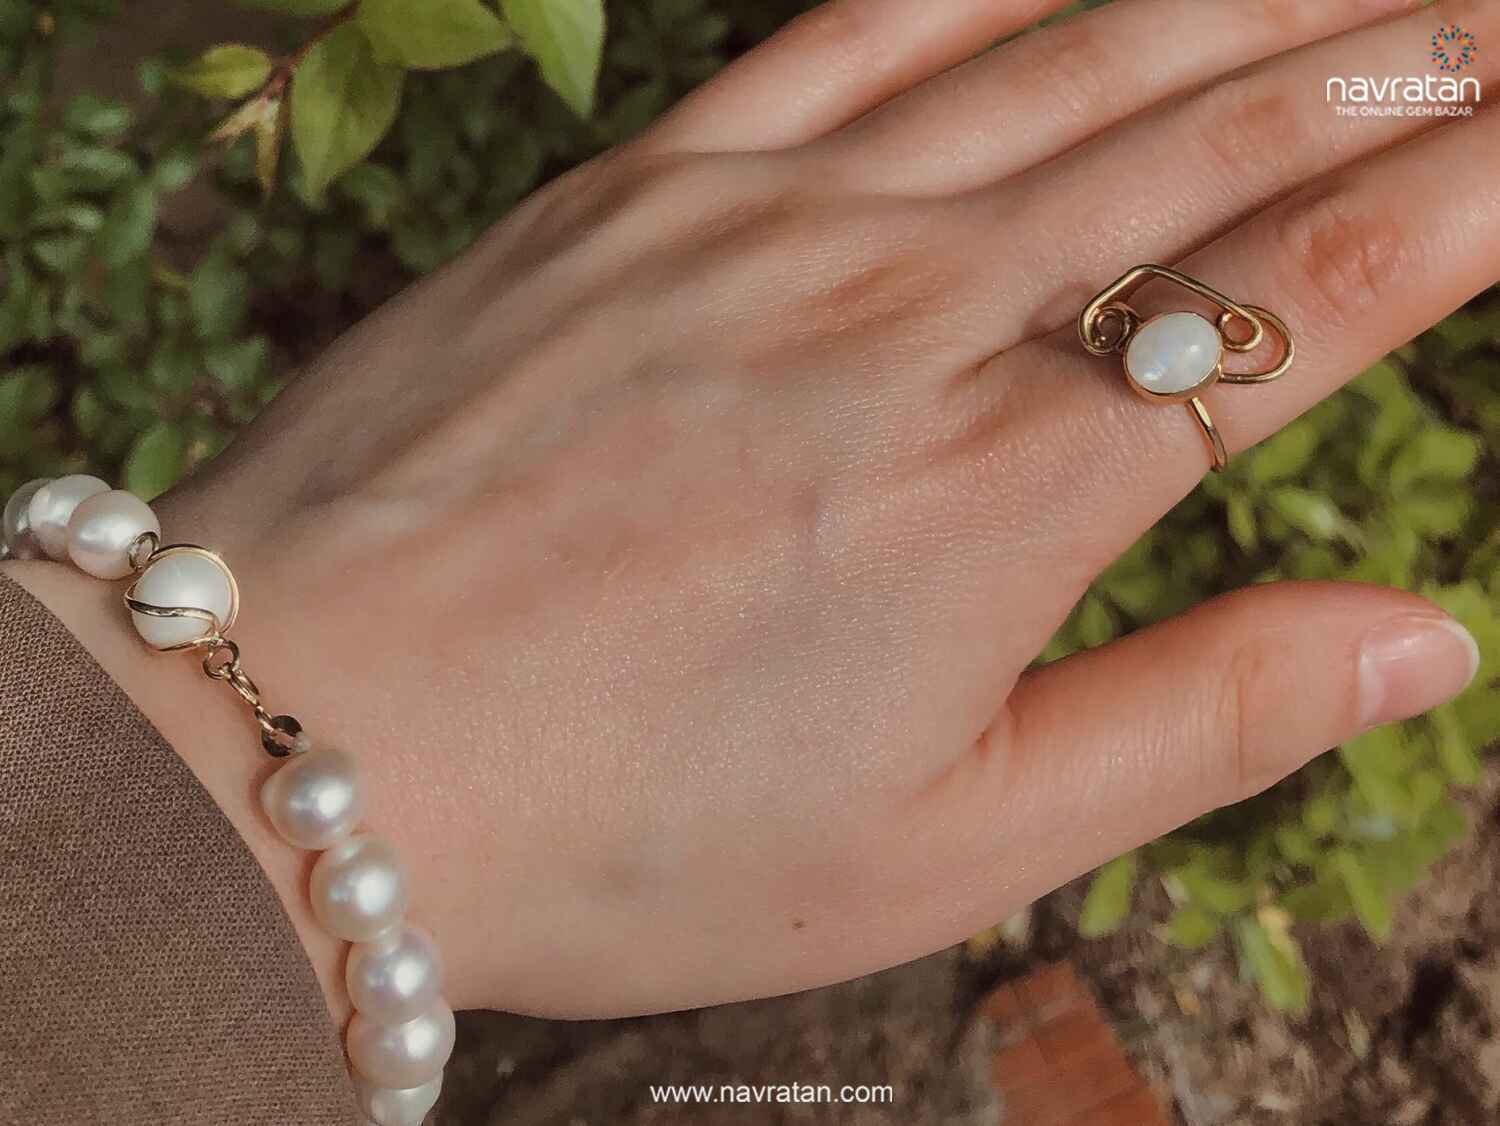 How to Care for Real Cultured Pearls?